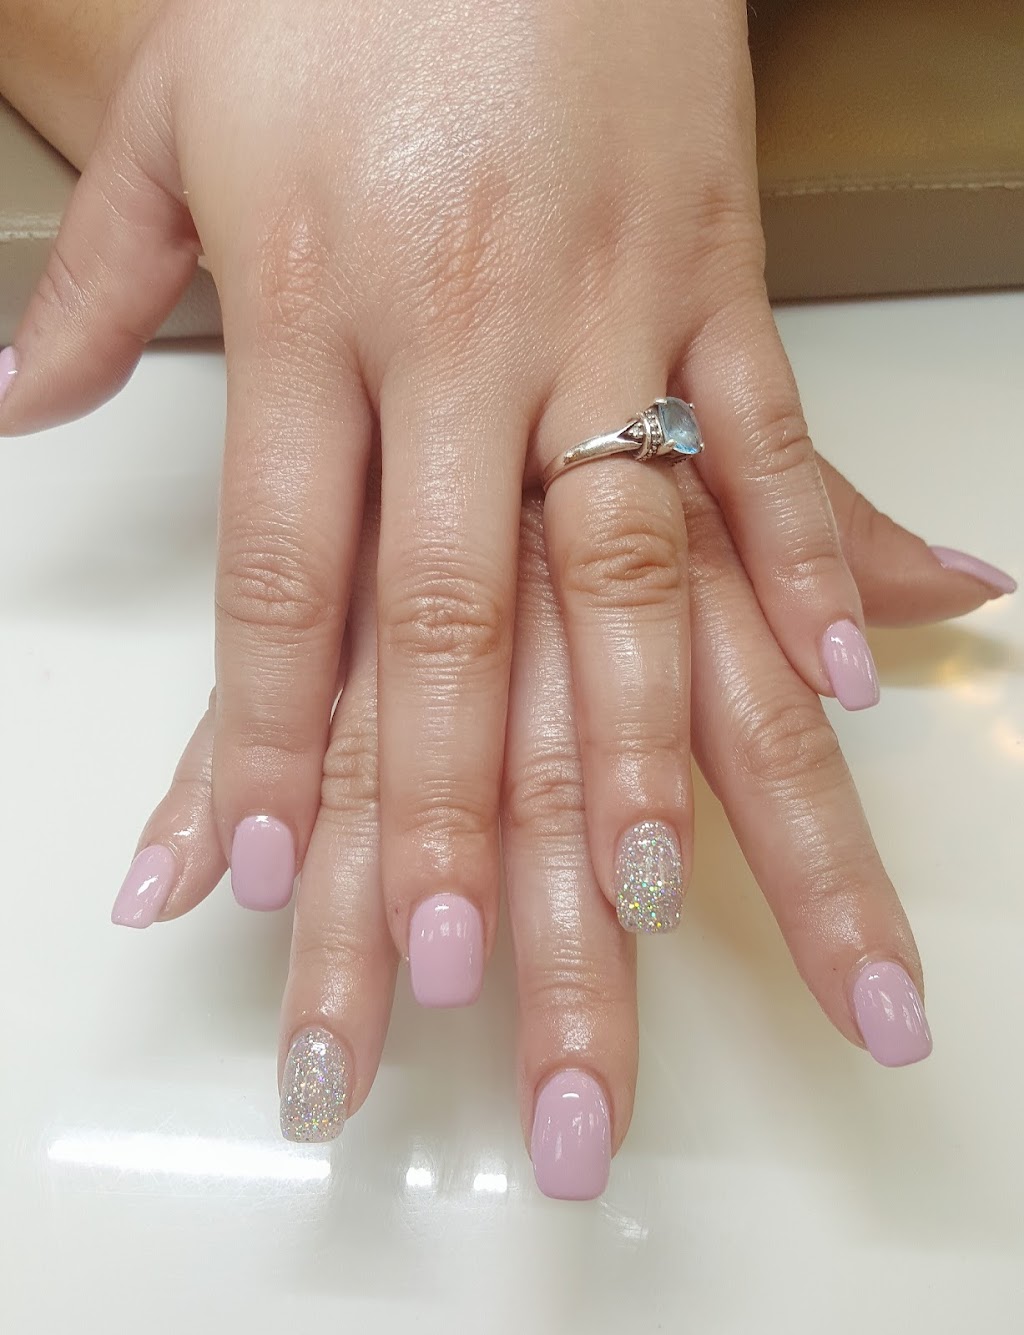 Super Nails & Spa 2( New Management) | 1097 Silas Deane Hwy, Wethersfield, CT 06109 | Phone: (860) 257-4357